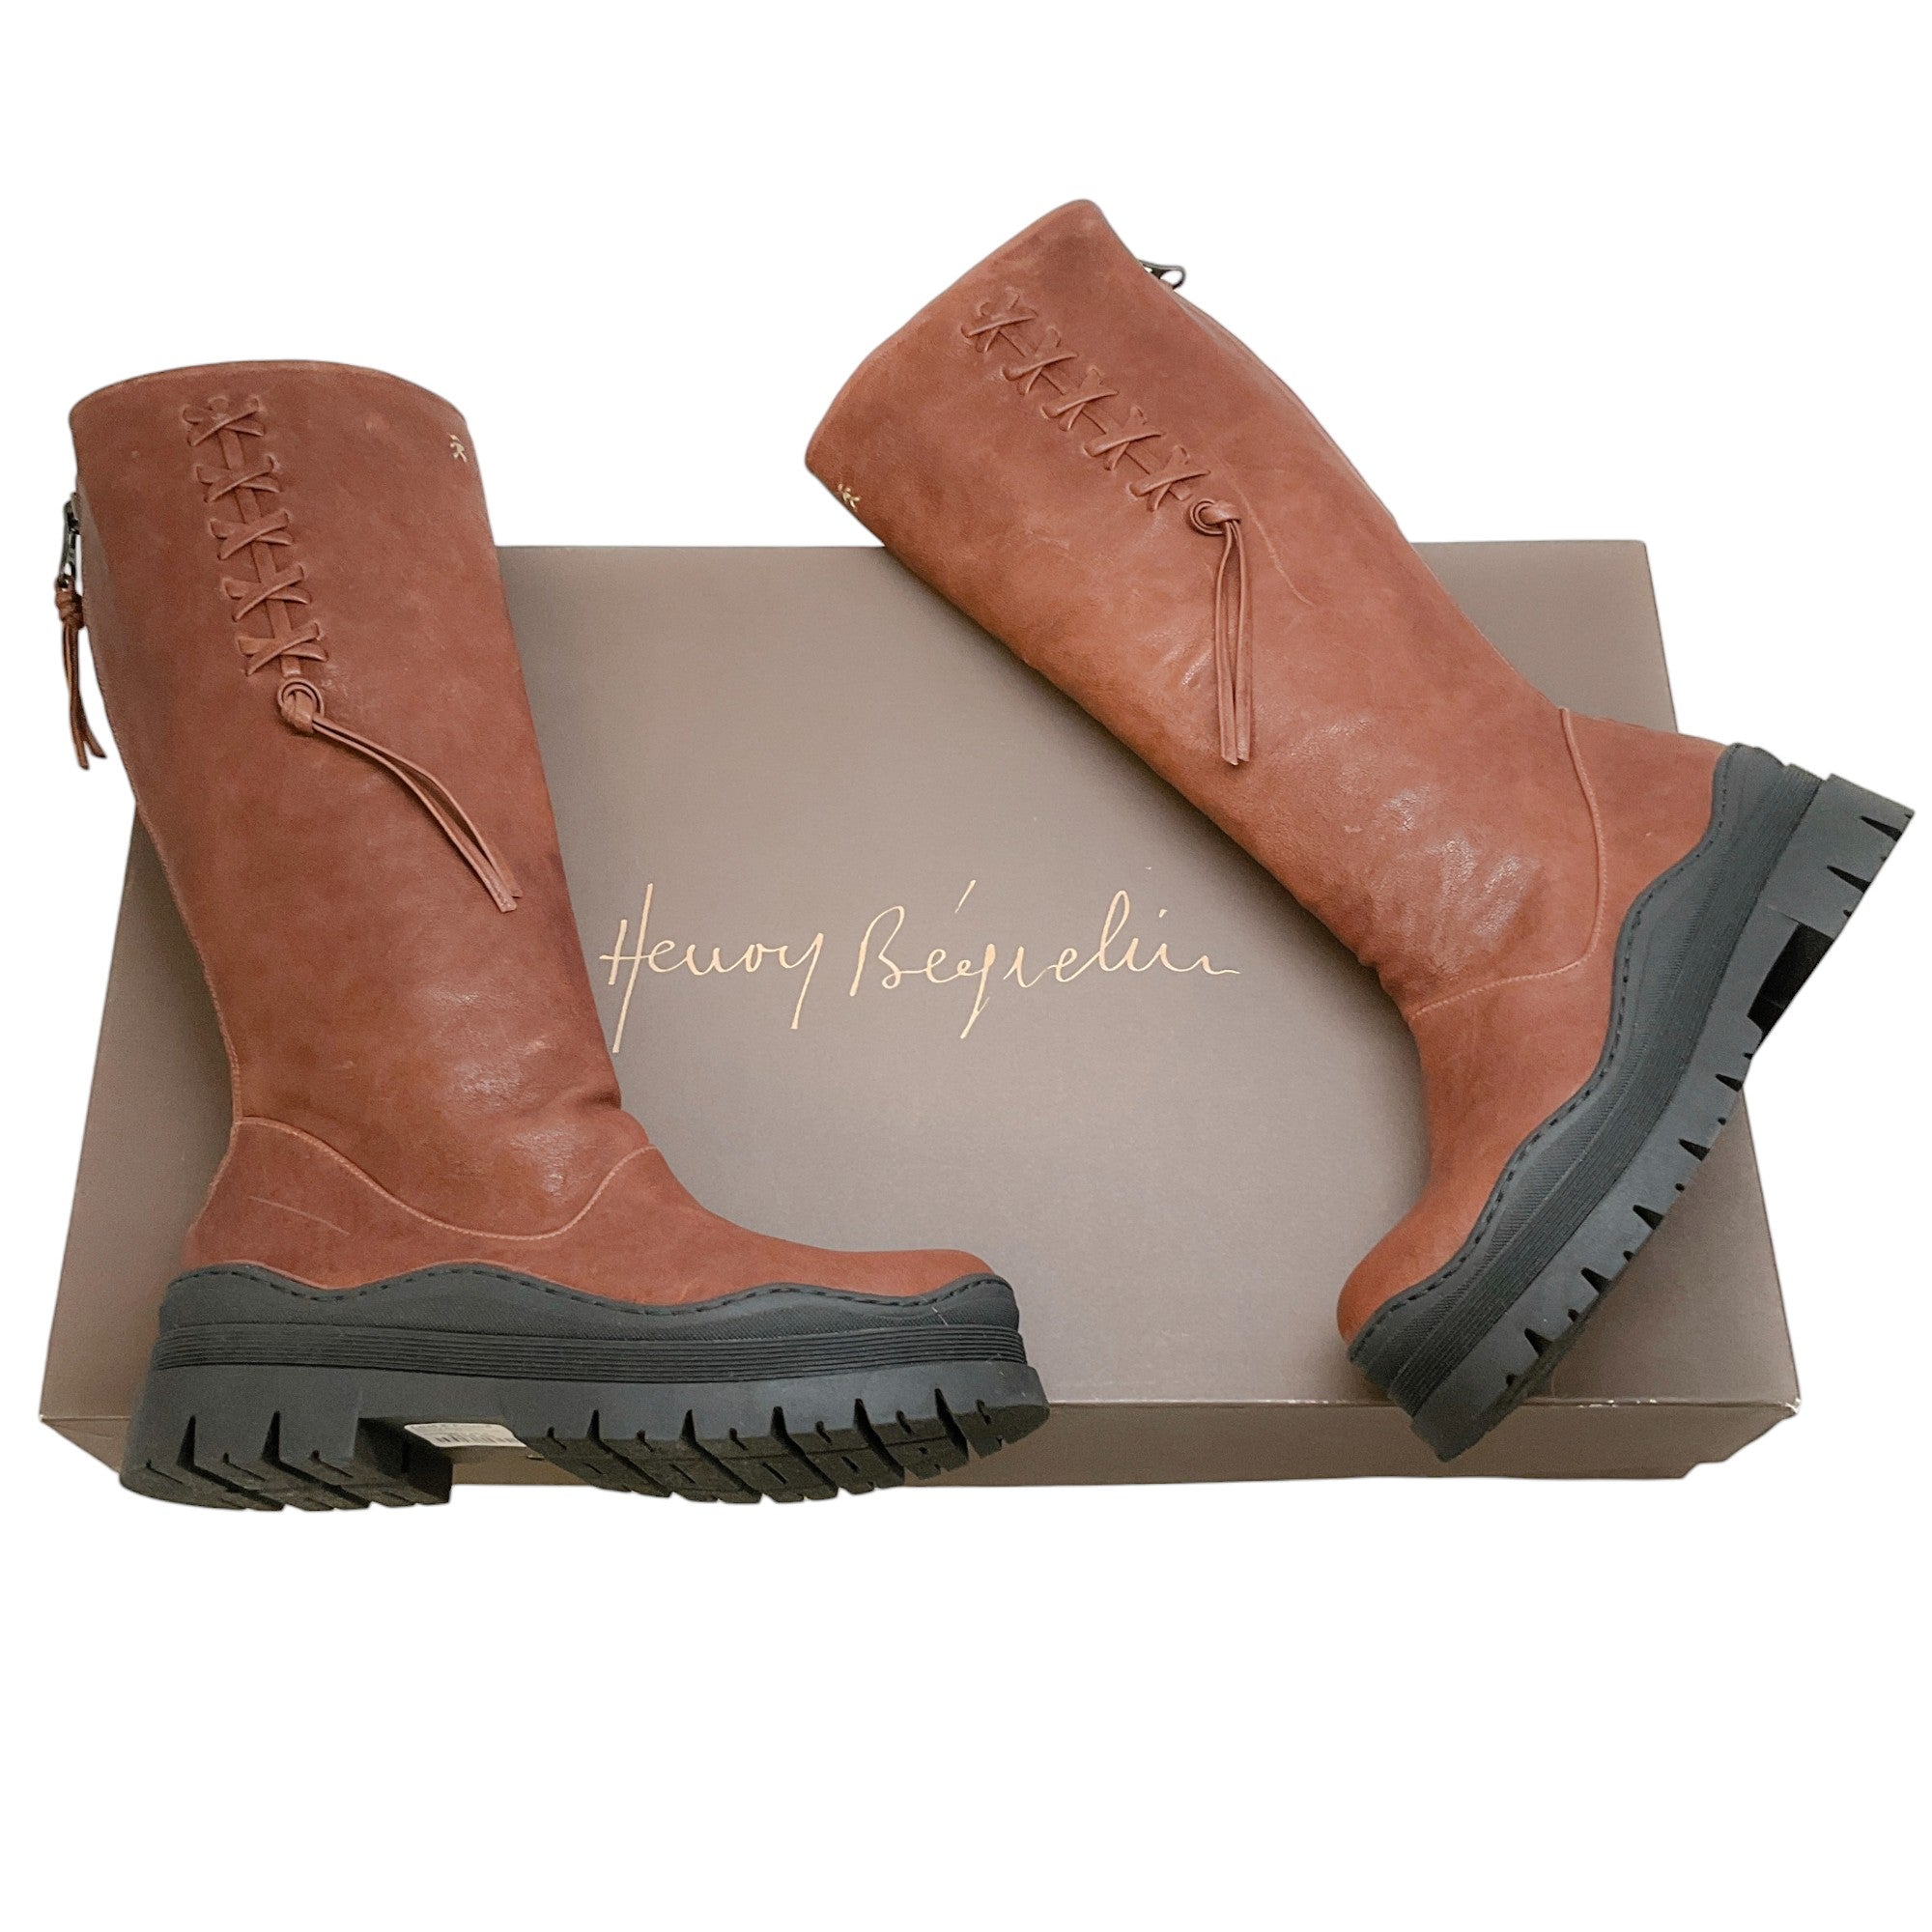 Henry Beguelin Brown Leather Stivale Boots